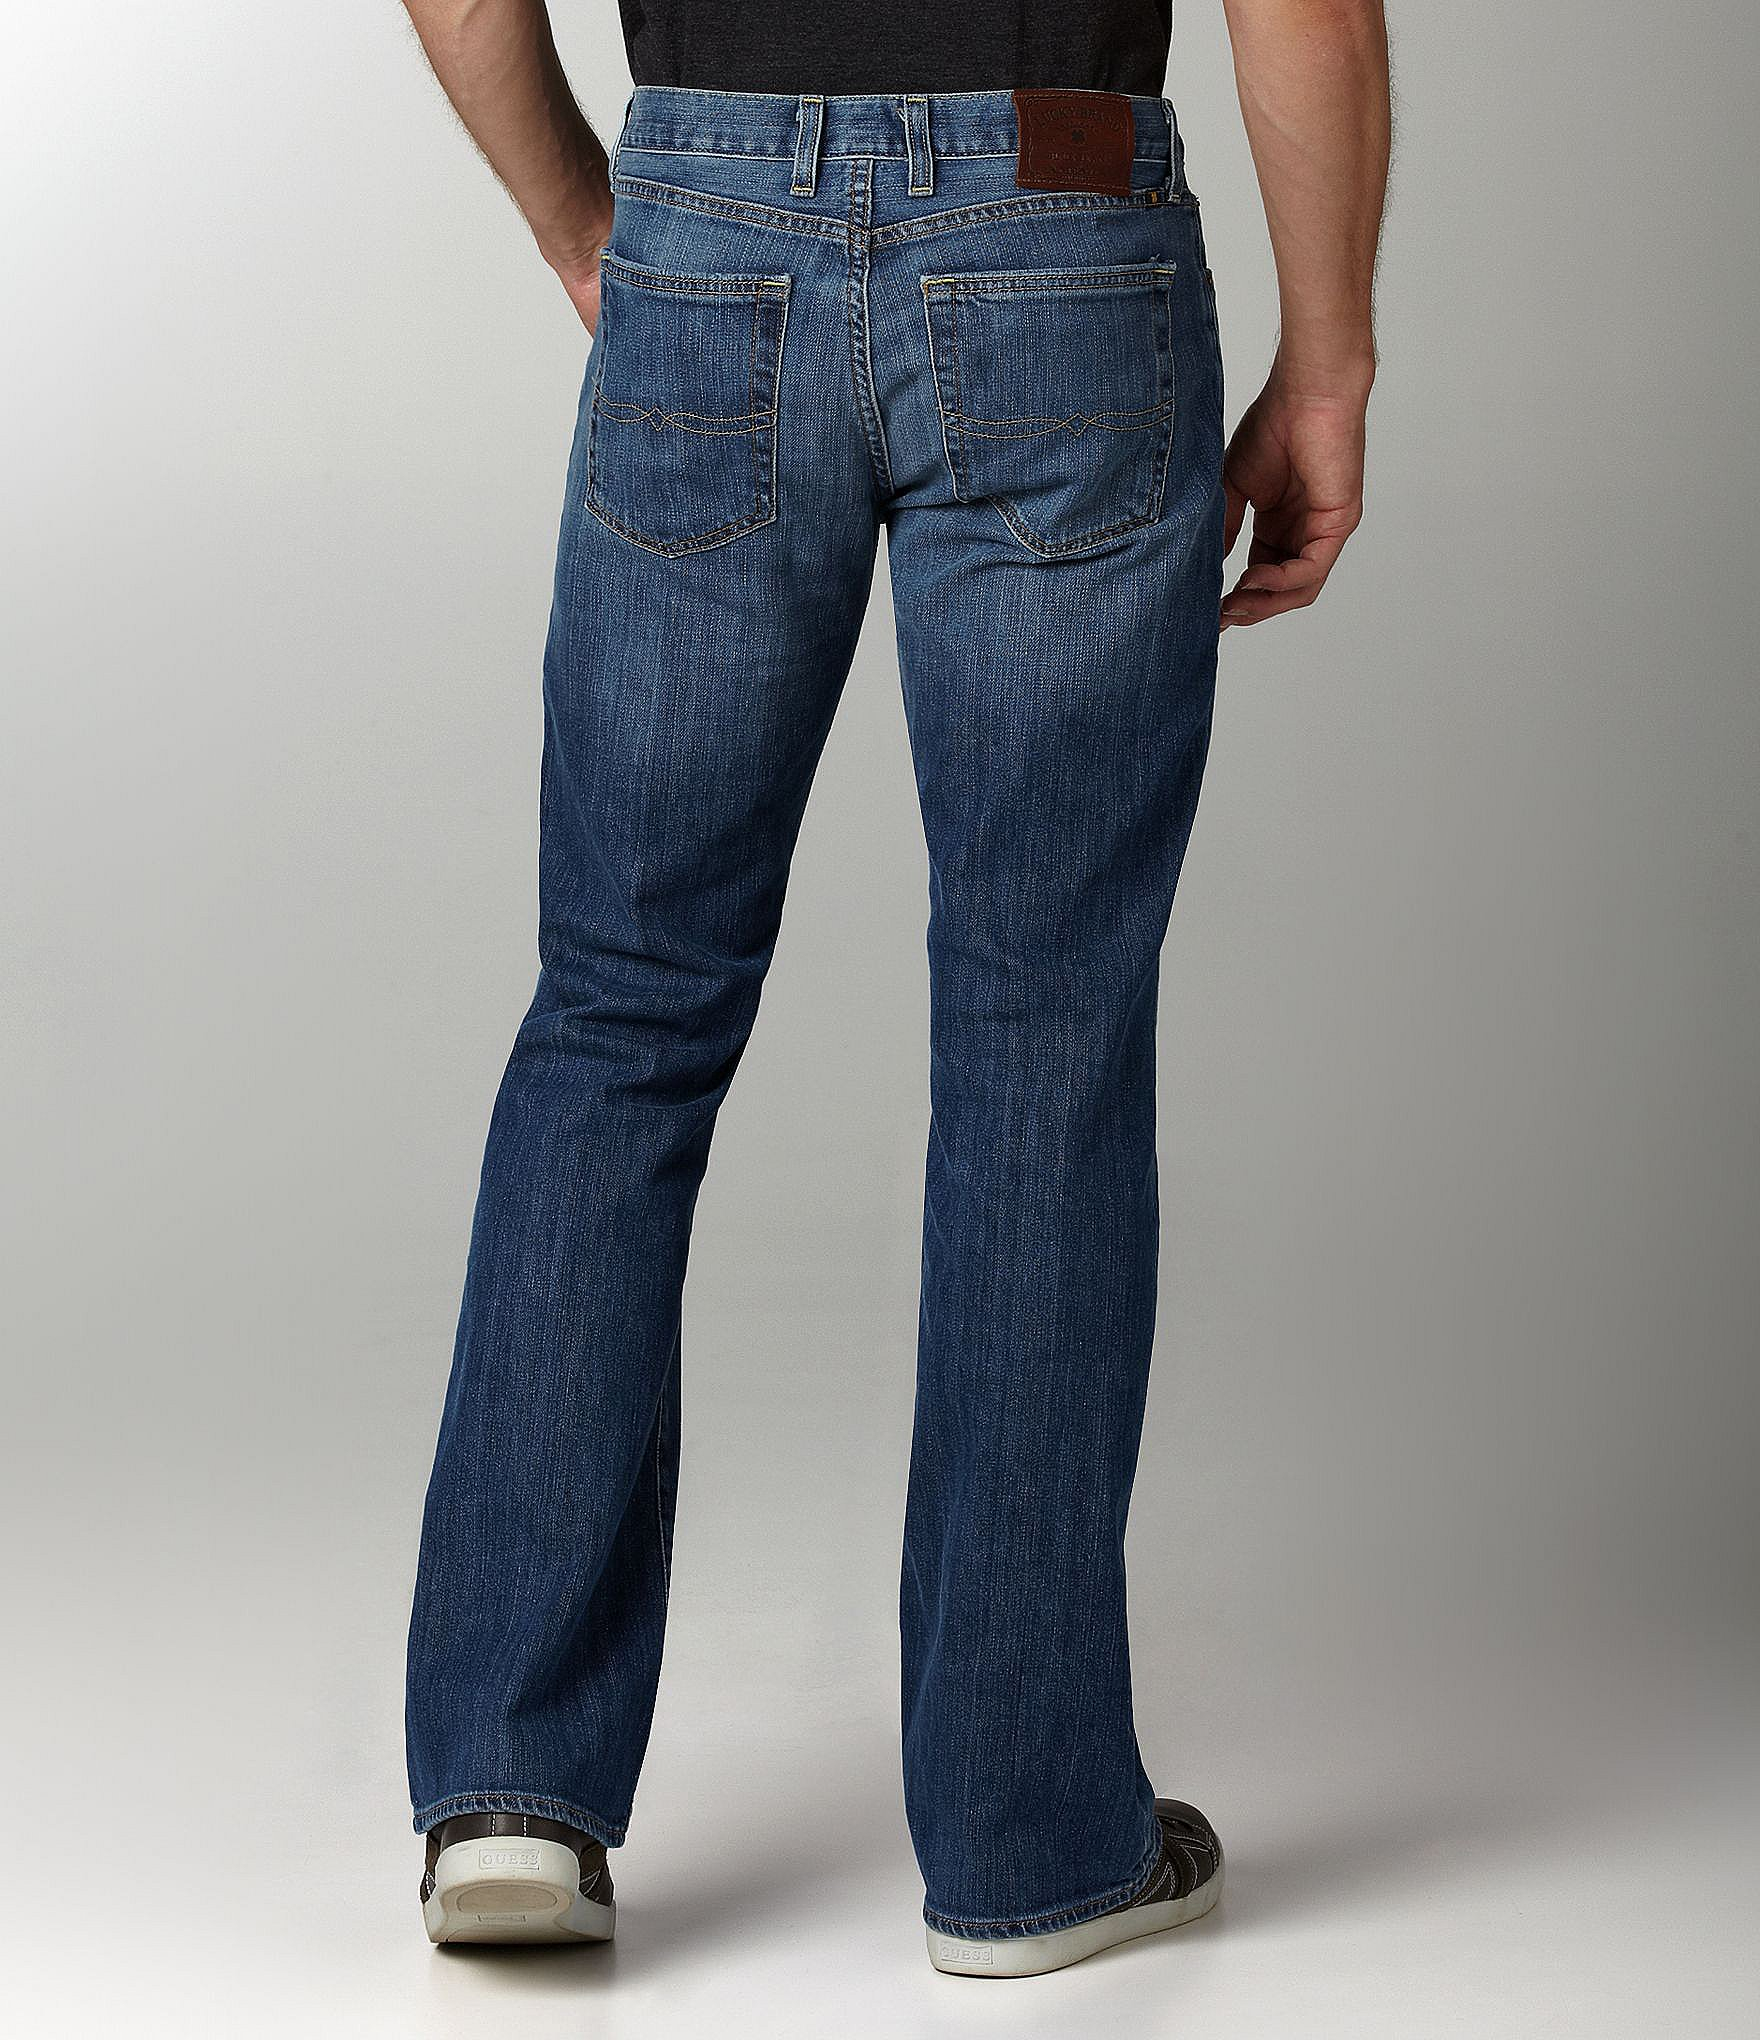 Lyst - Lucky Brand 367 Vintage Bootcut Jeans in Blue for Men